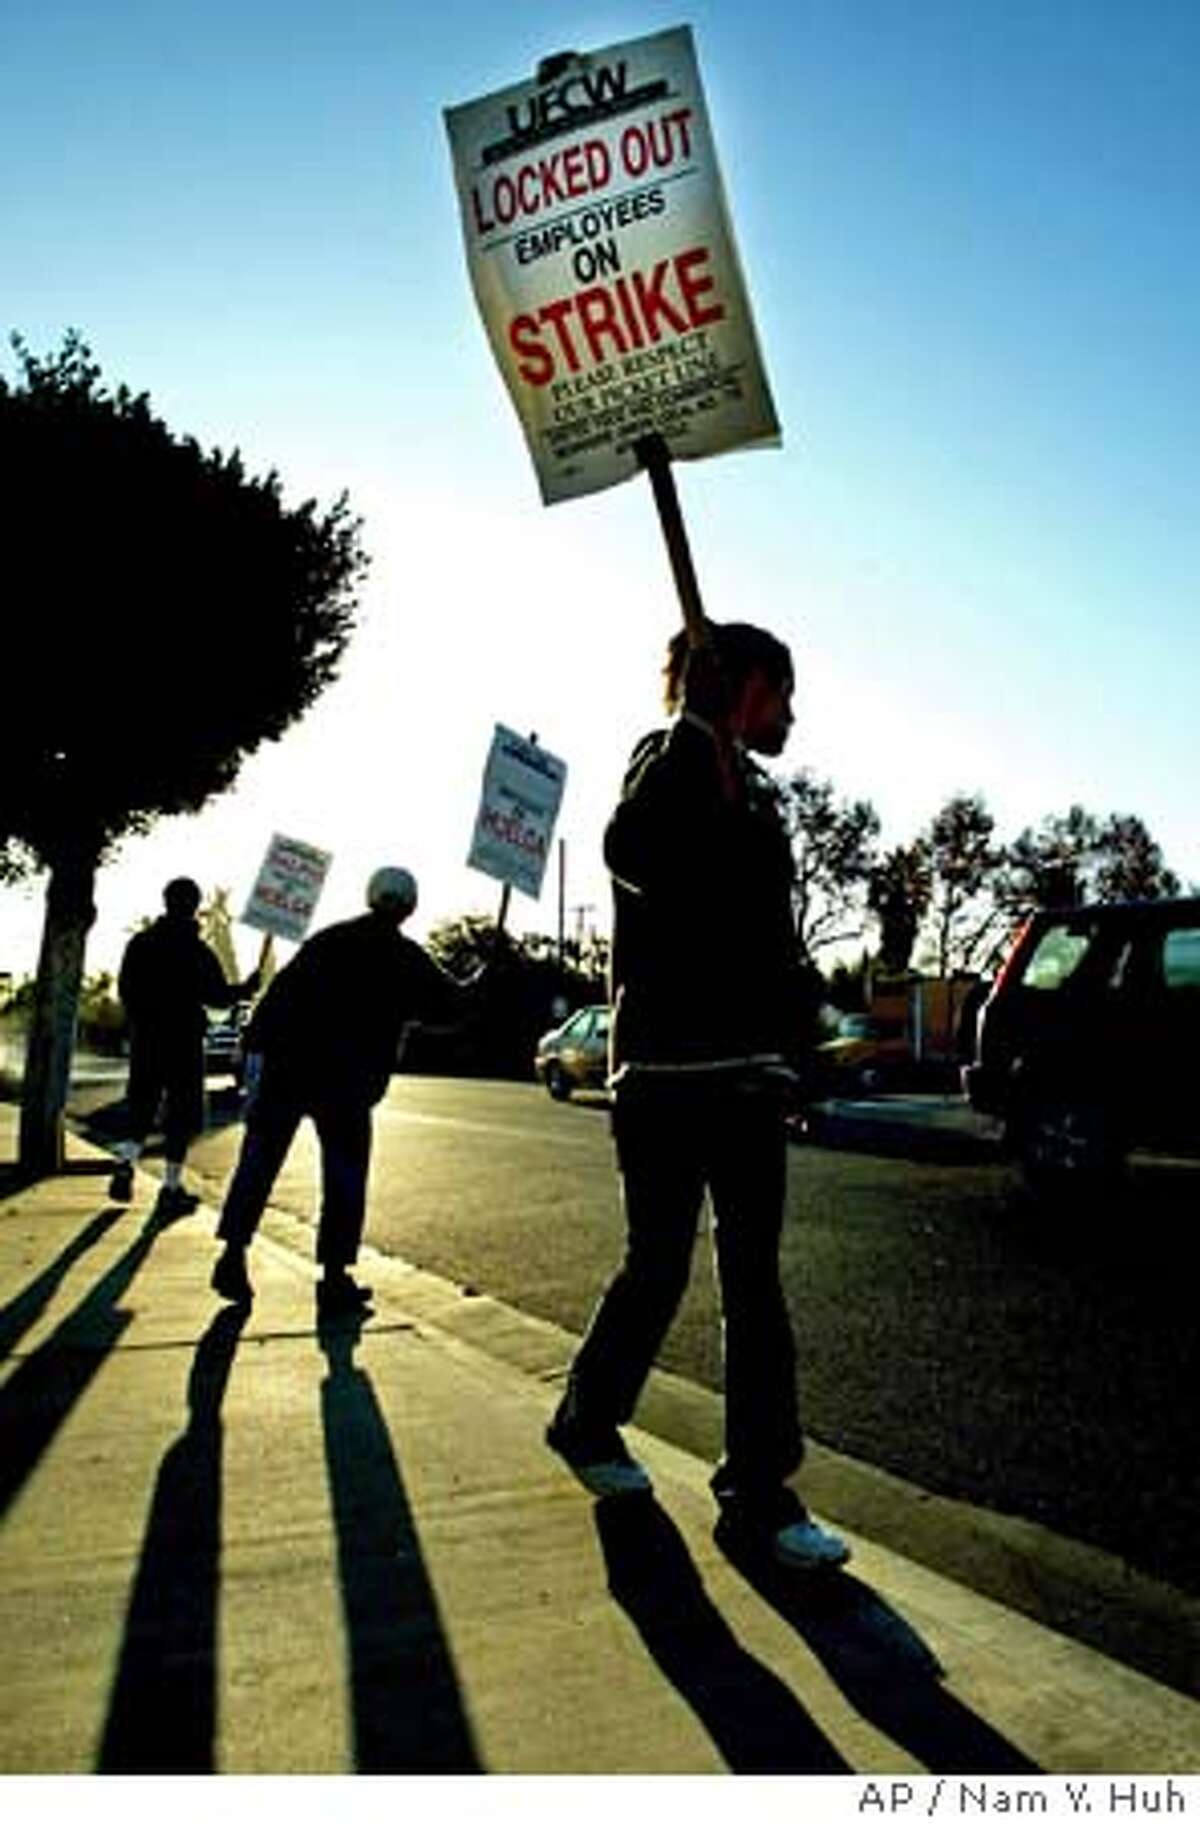 A group of clerks form a picket line outside a Ralphs grocery store Monday, Oct. 13, 2003, in Los Angeles. More than 70,000 Southern California grocery clerks went on strike late Saturday after lengthy negotiations ended between union representatives and grocery store officials. (AP Photo/ Nam Y. Huh) A group of clerks form a picket line outside a Ralphs grocery store in Los Angeles. CAT RODRIZE IS CQ